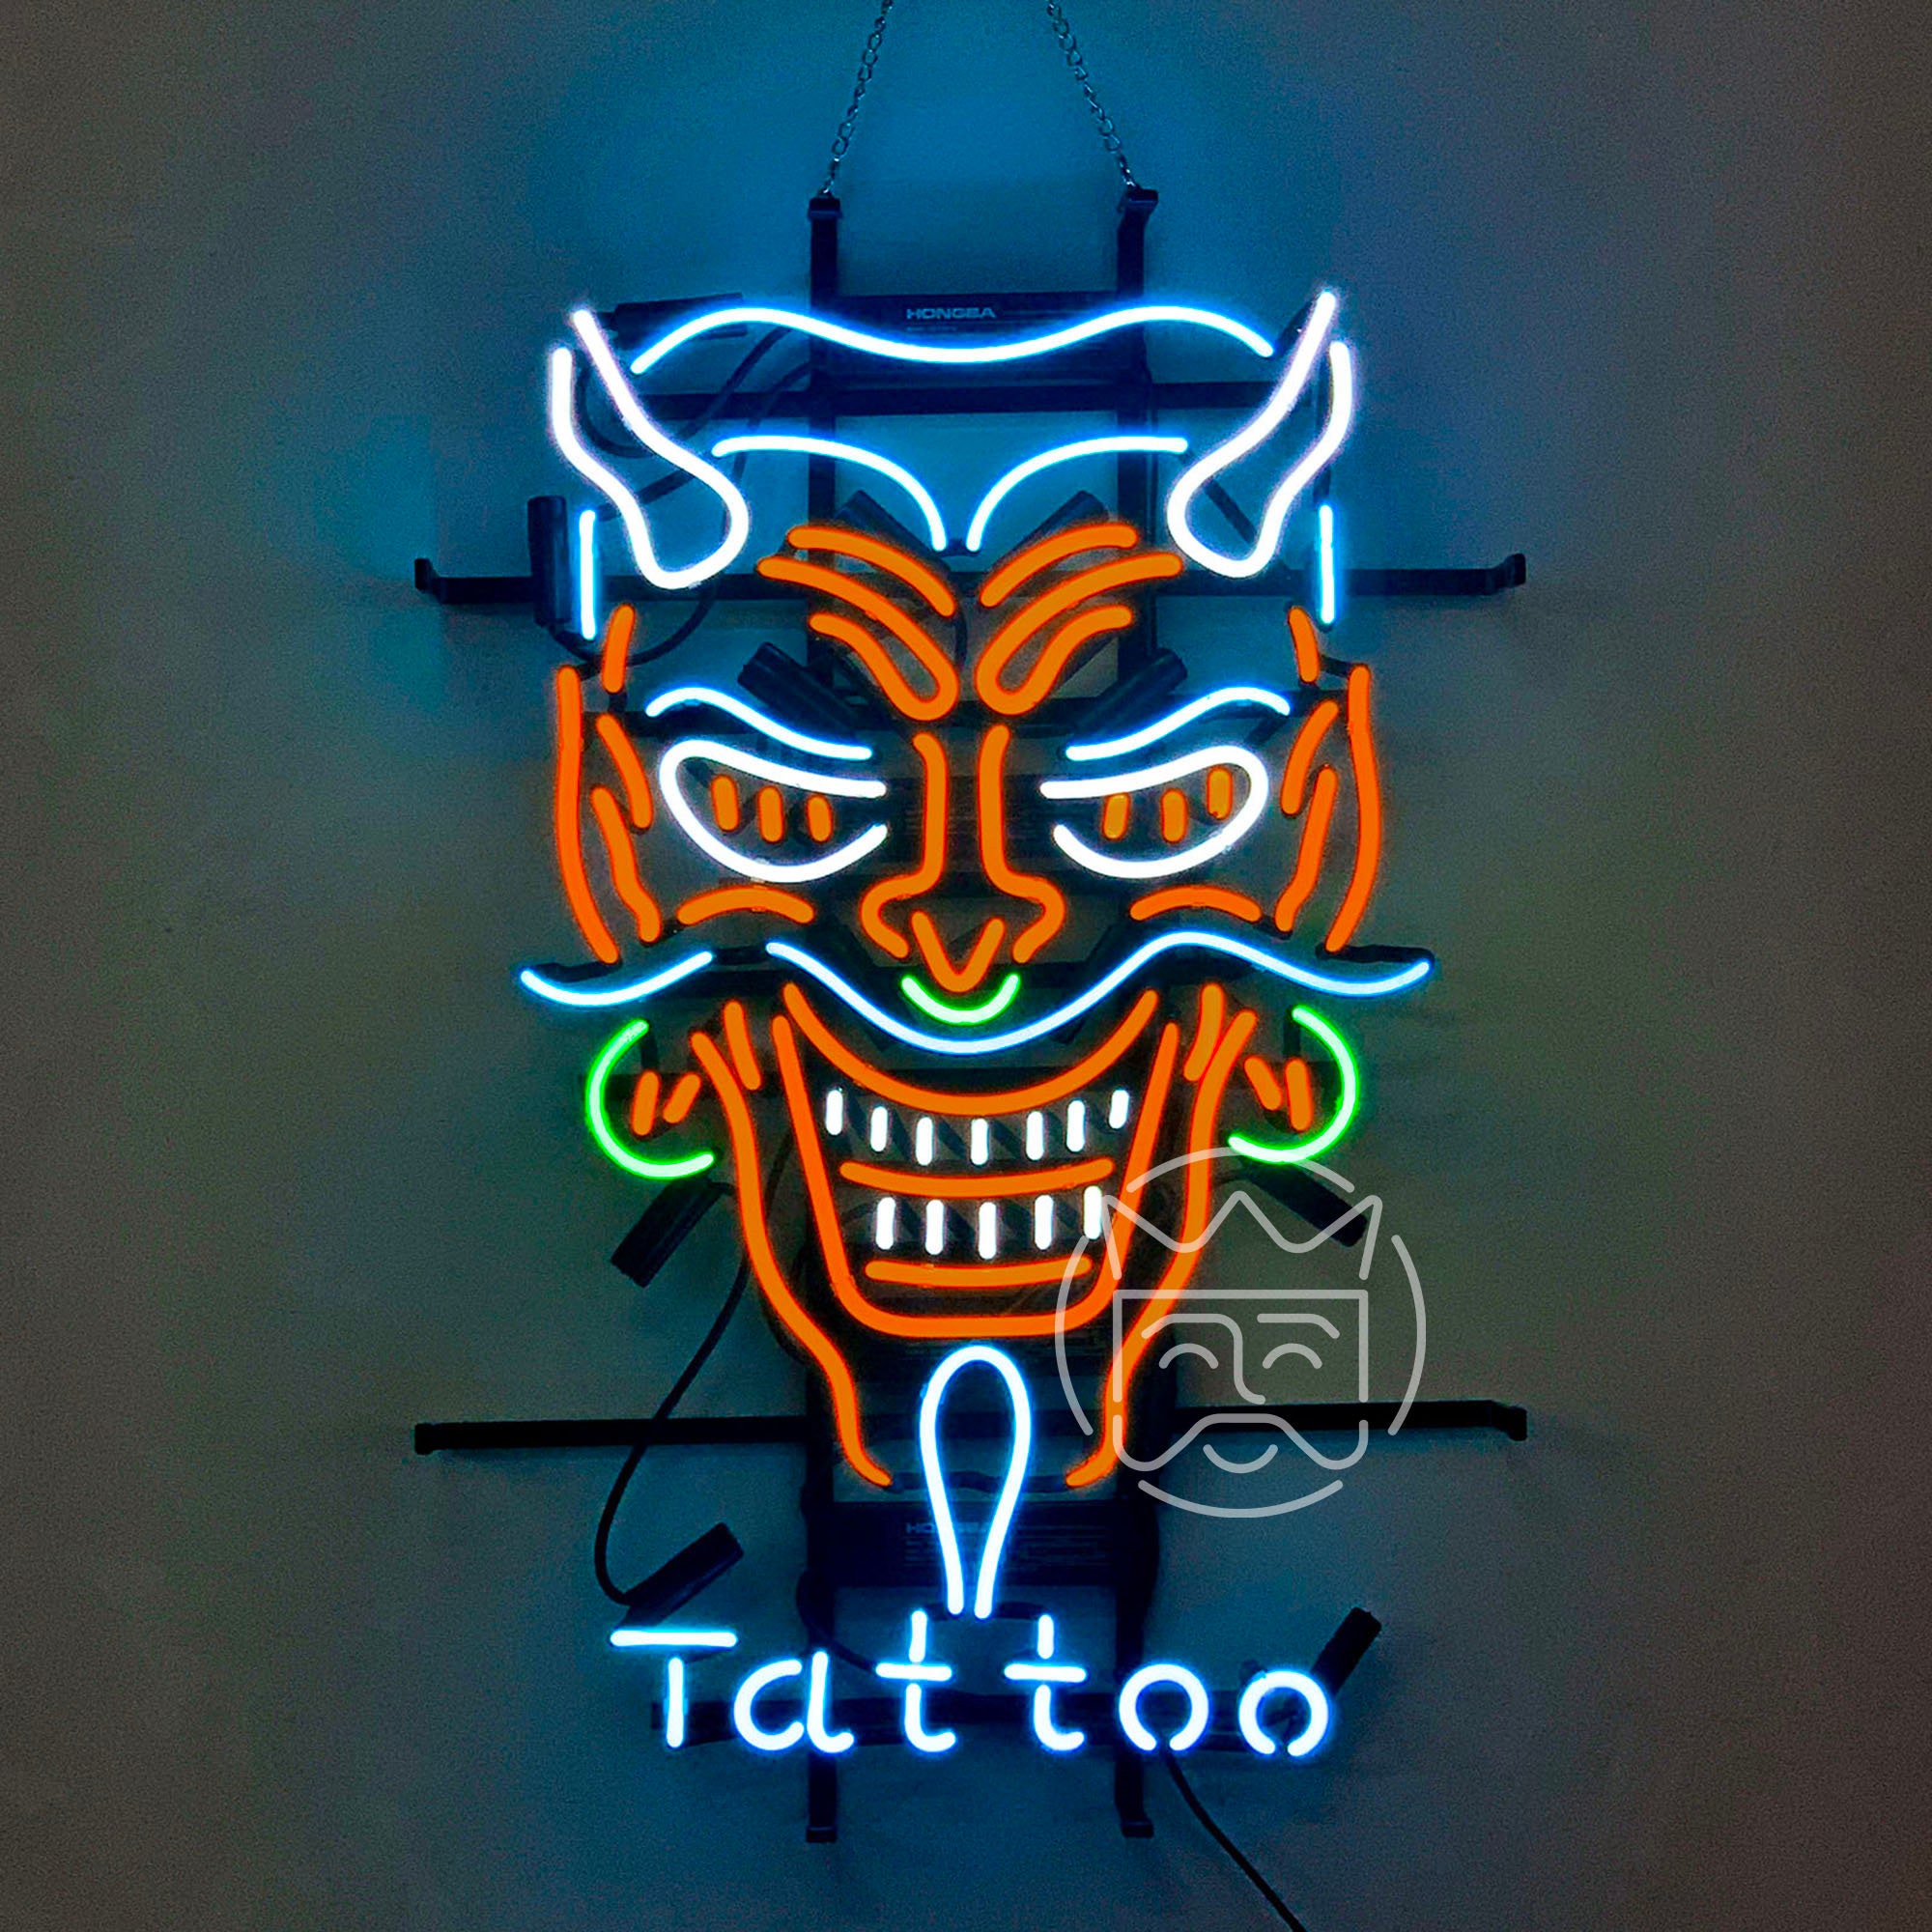 Glowing Electric Age Neon Sign of a Tattoo Shop  Free Stock Photo